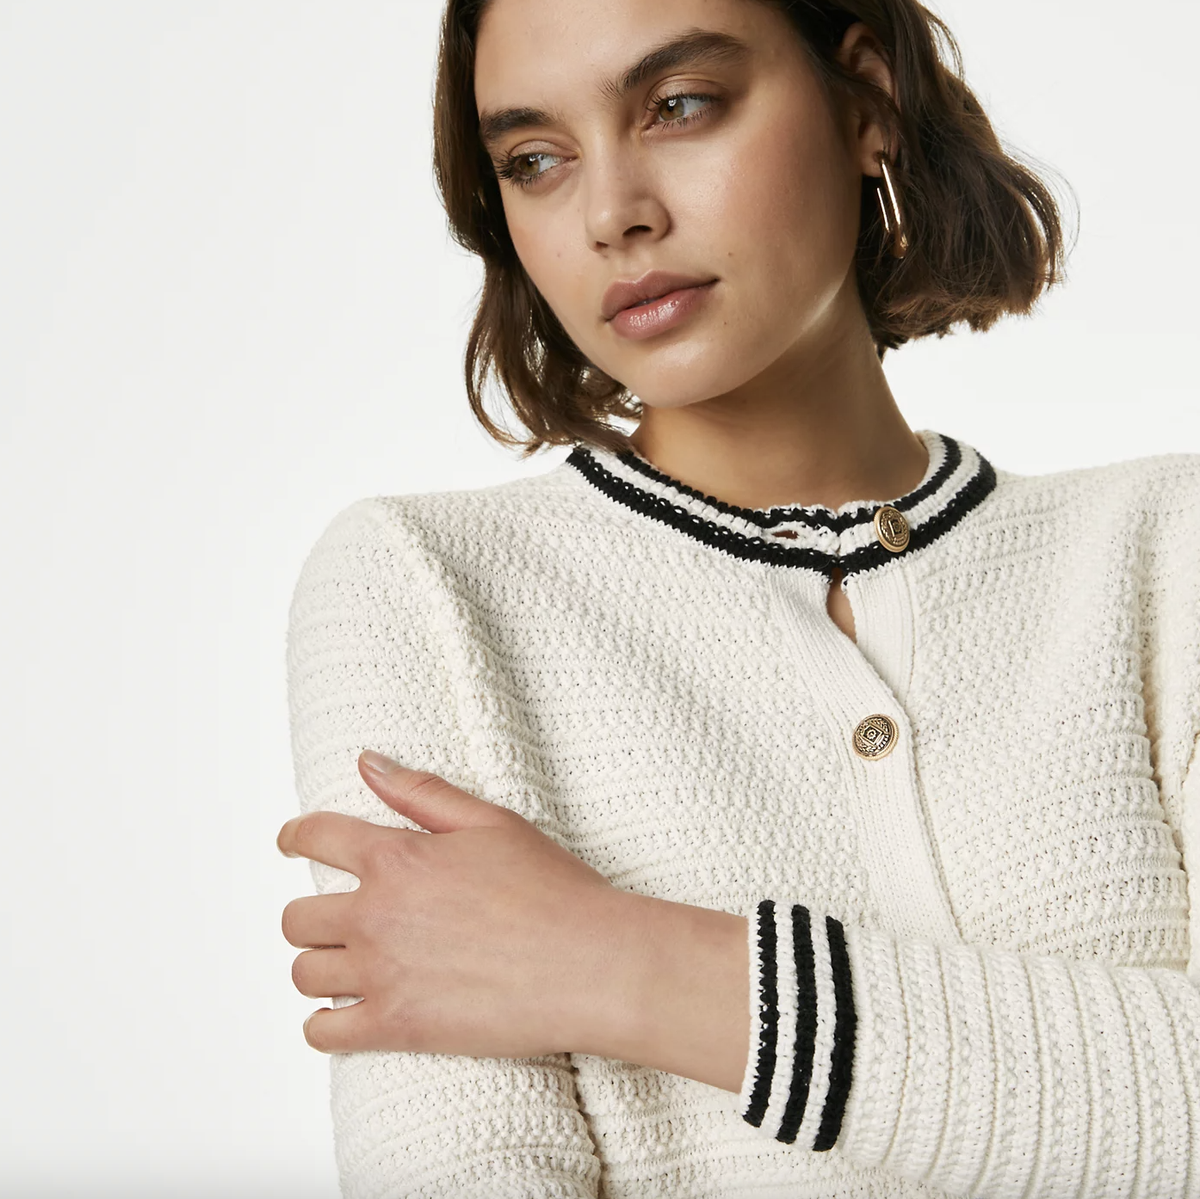 Marks & Spencer's new £35 preppy cardigan feels right on trend